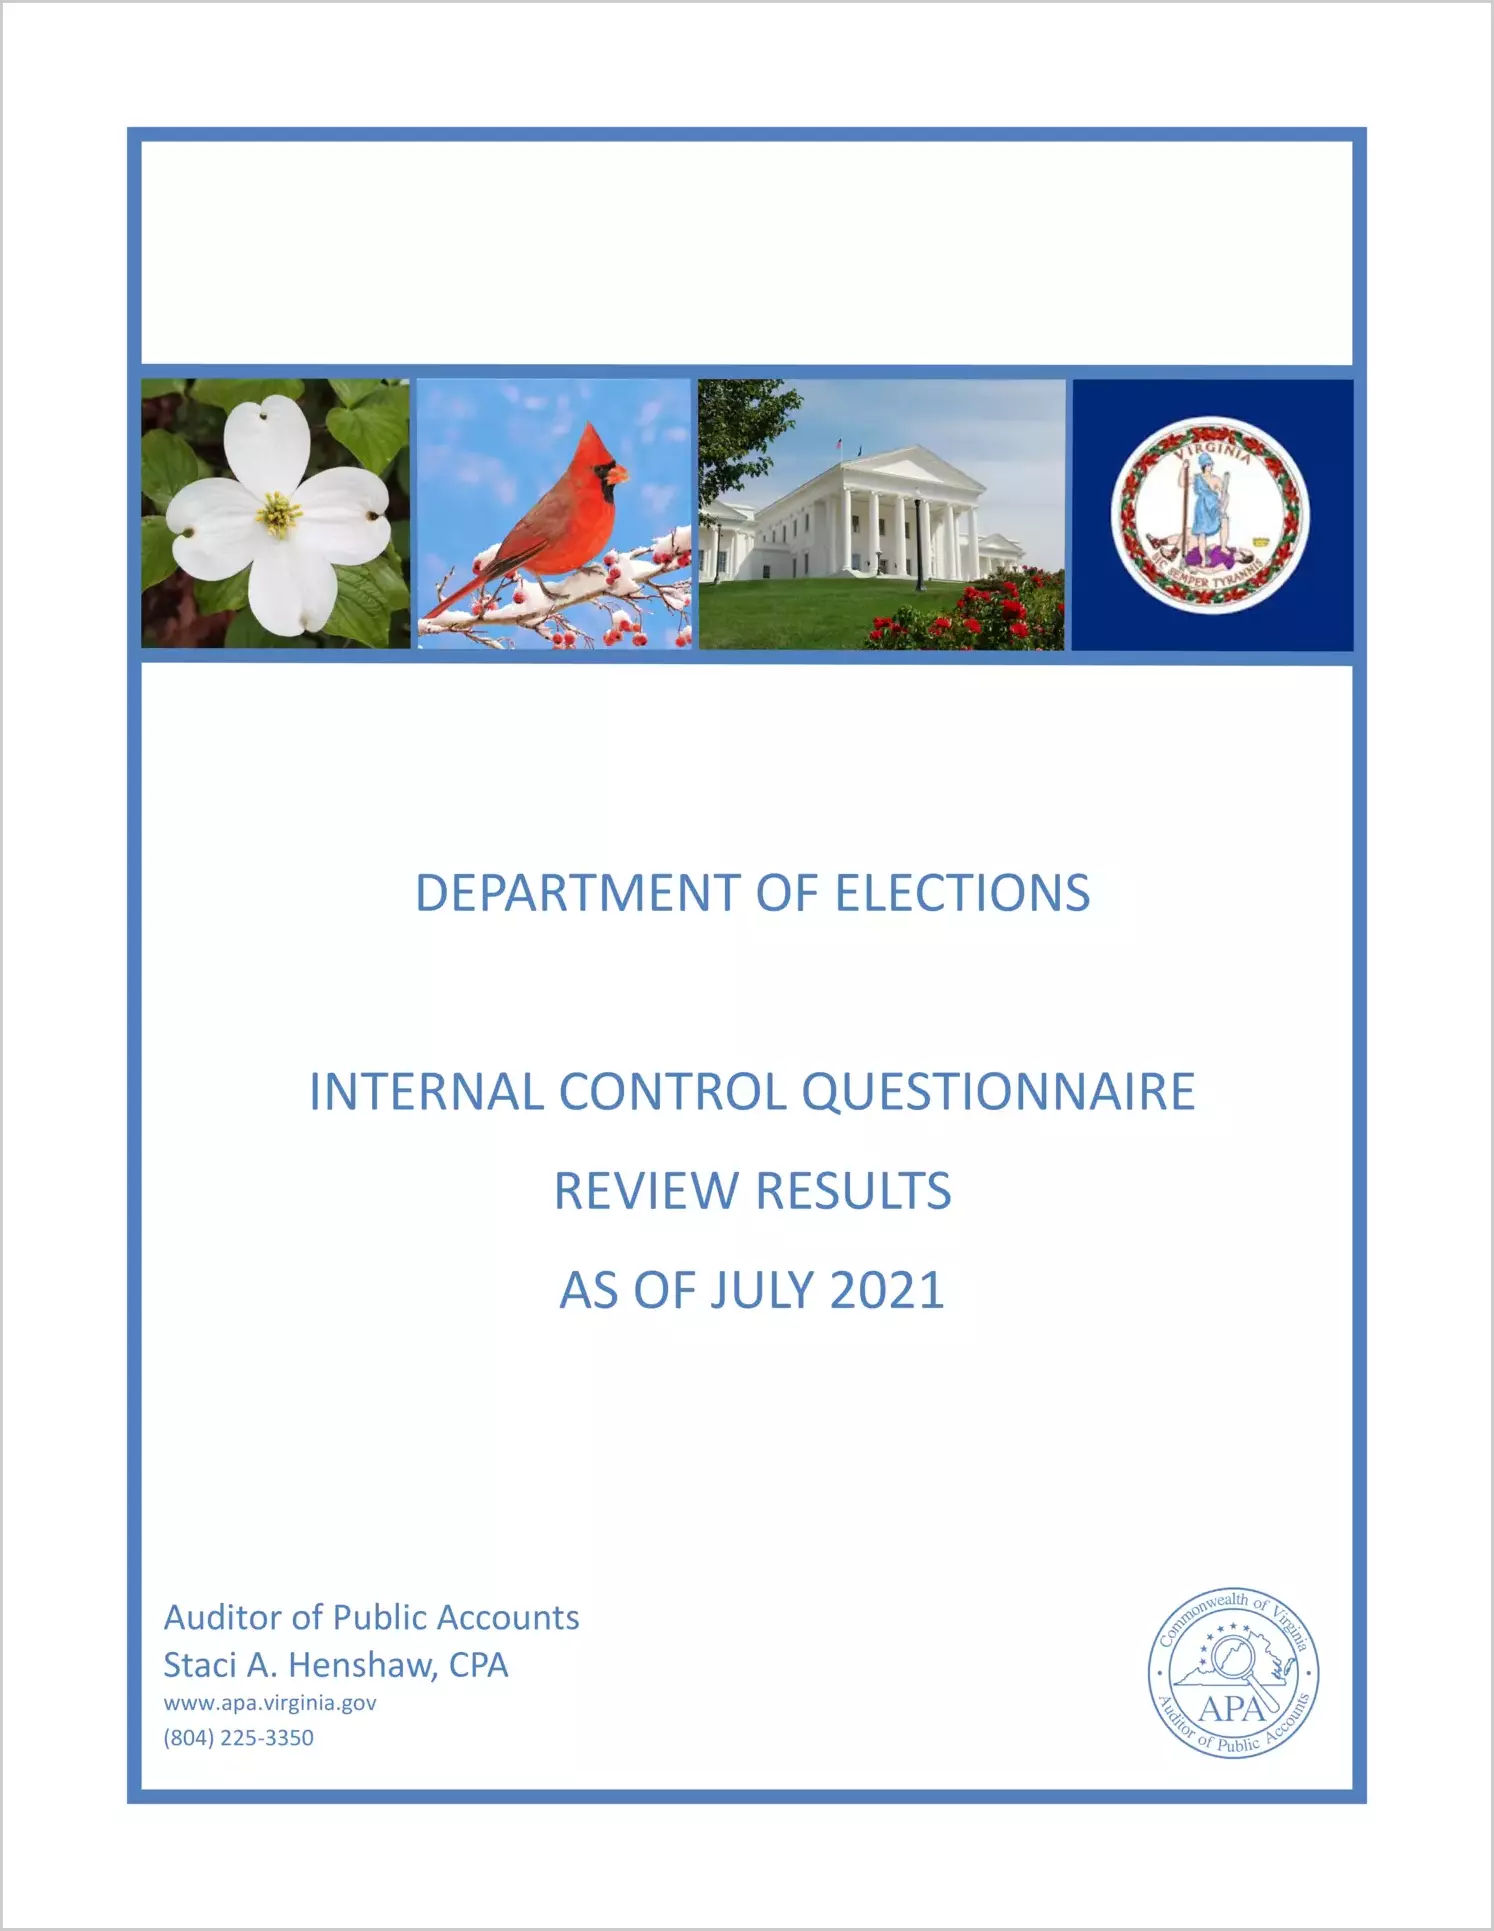 Department of Elections Internal Control Questionnaire Review Results as of July 2021